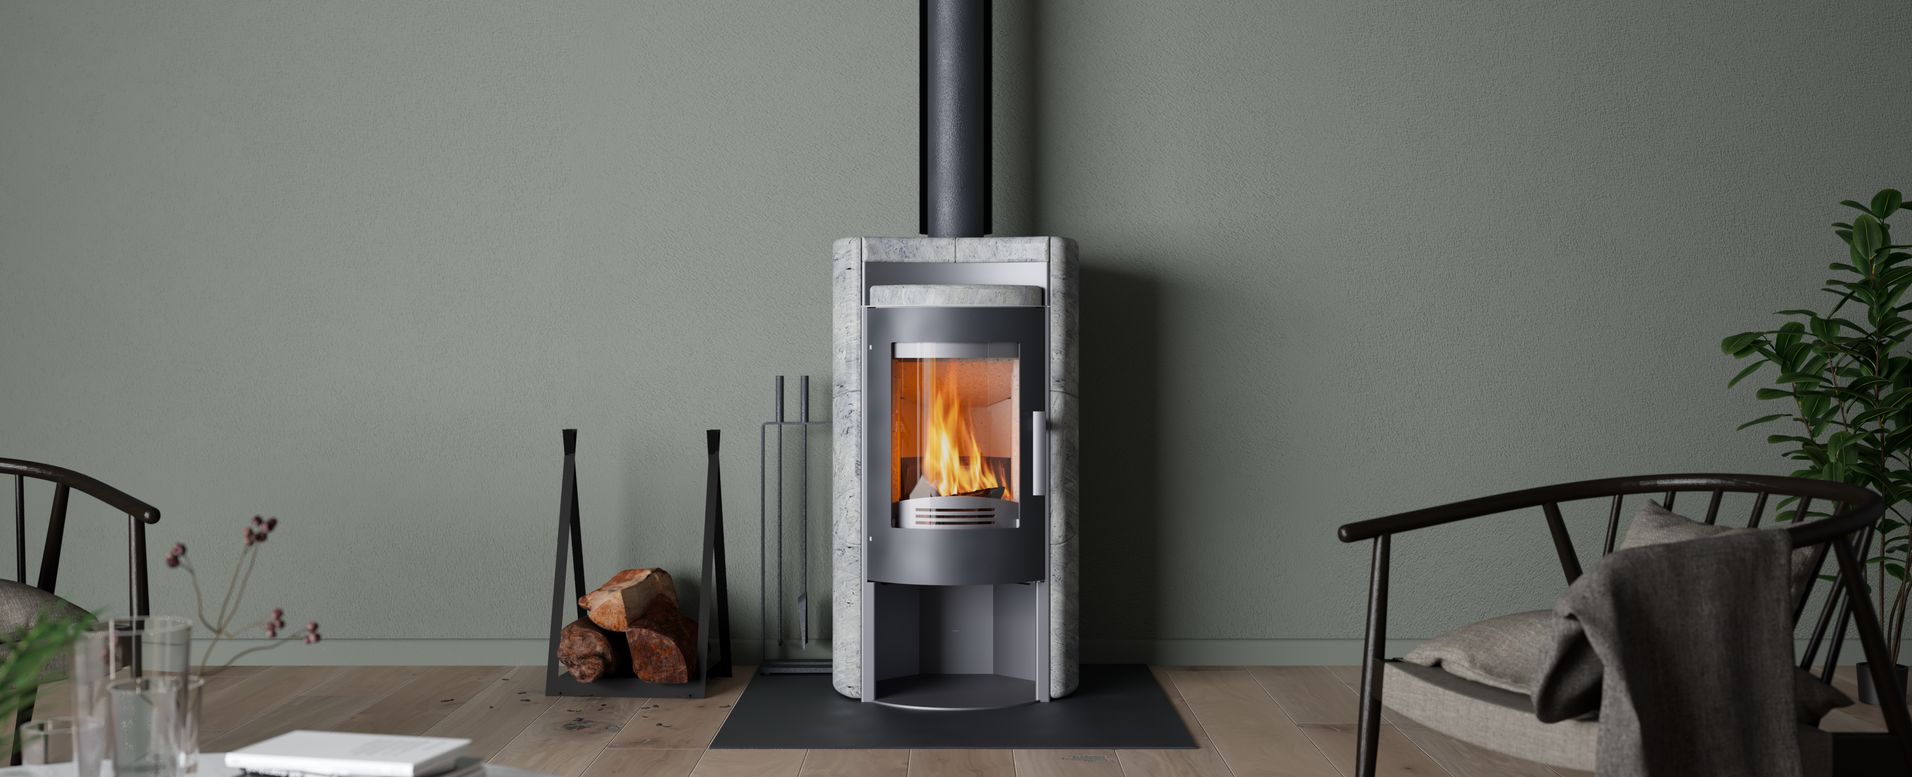 Euro Fireplaces Banner image